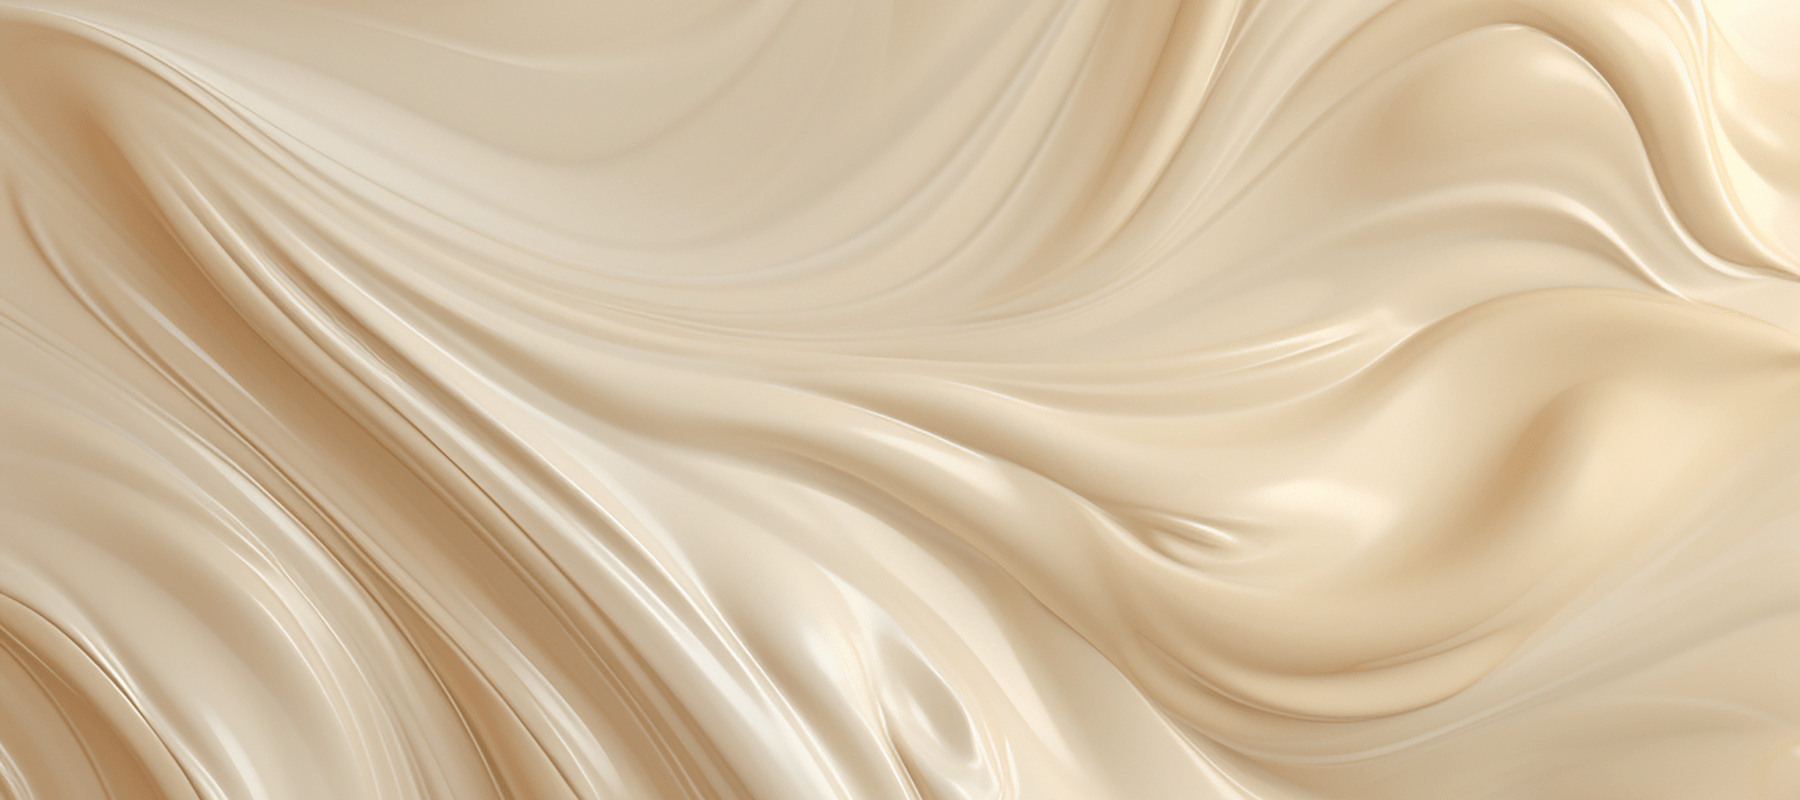 Smooth beige silk texture representing the frequently asked questions (FAQs) section for BioFusion Peptides